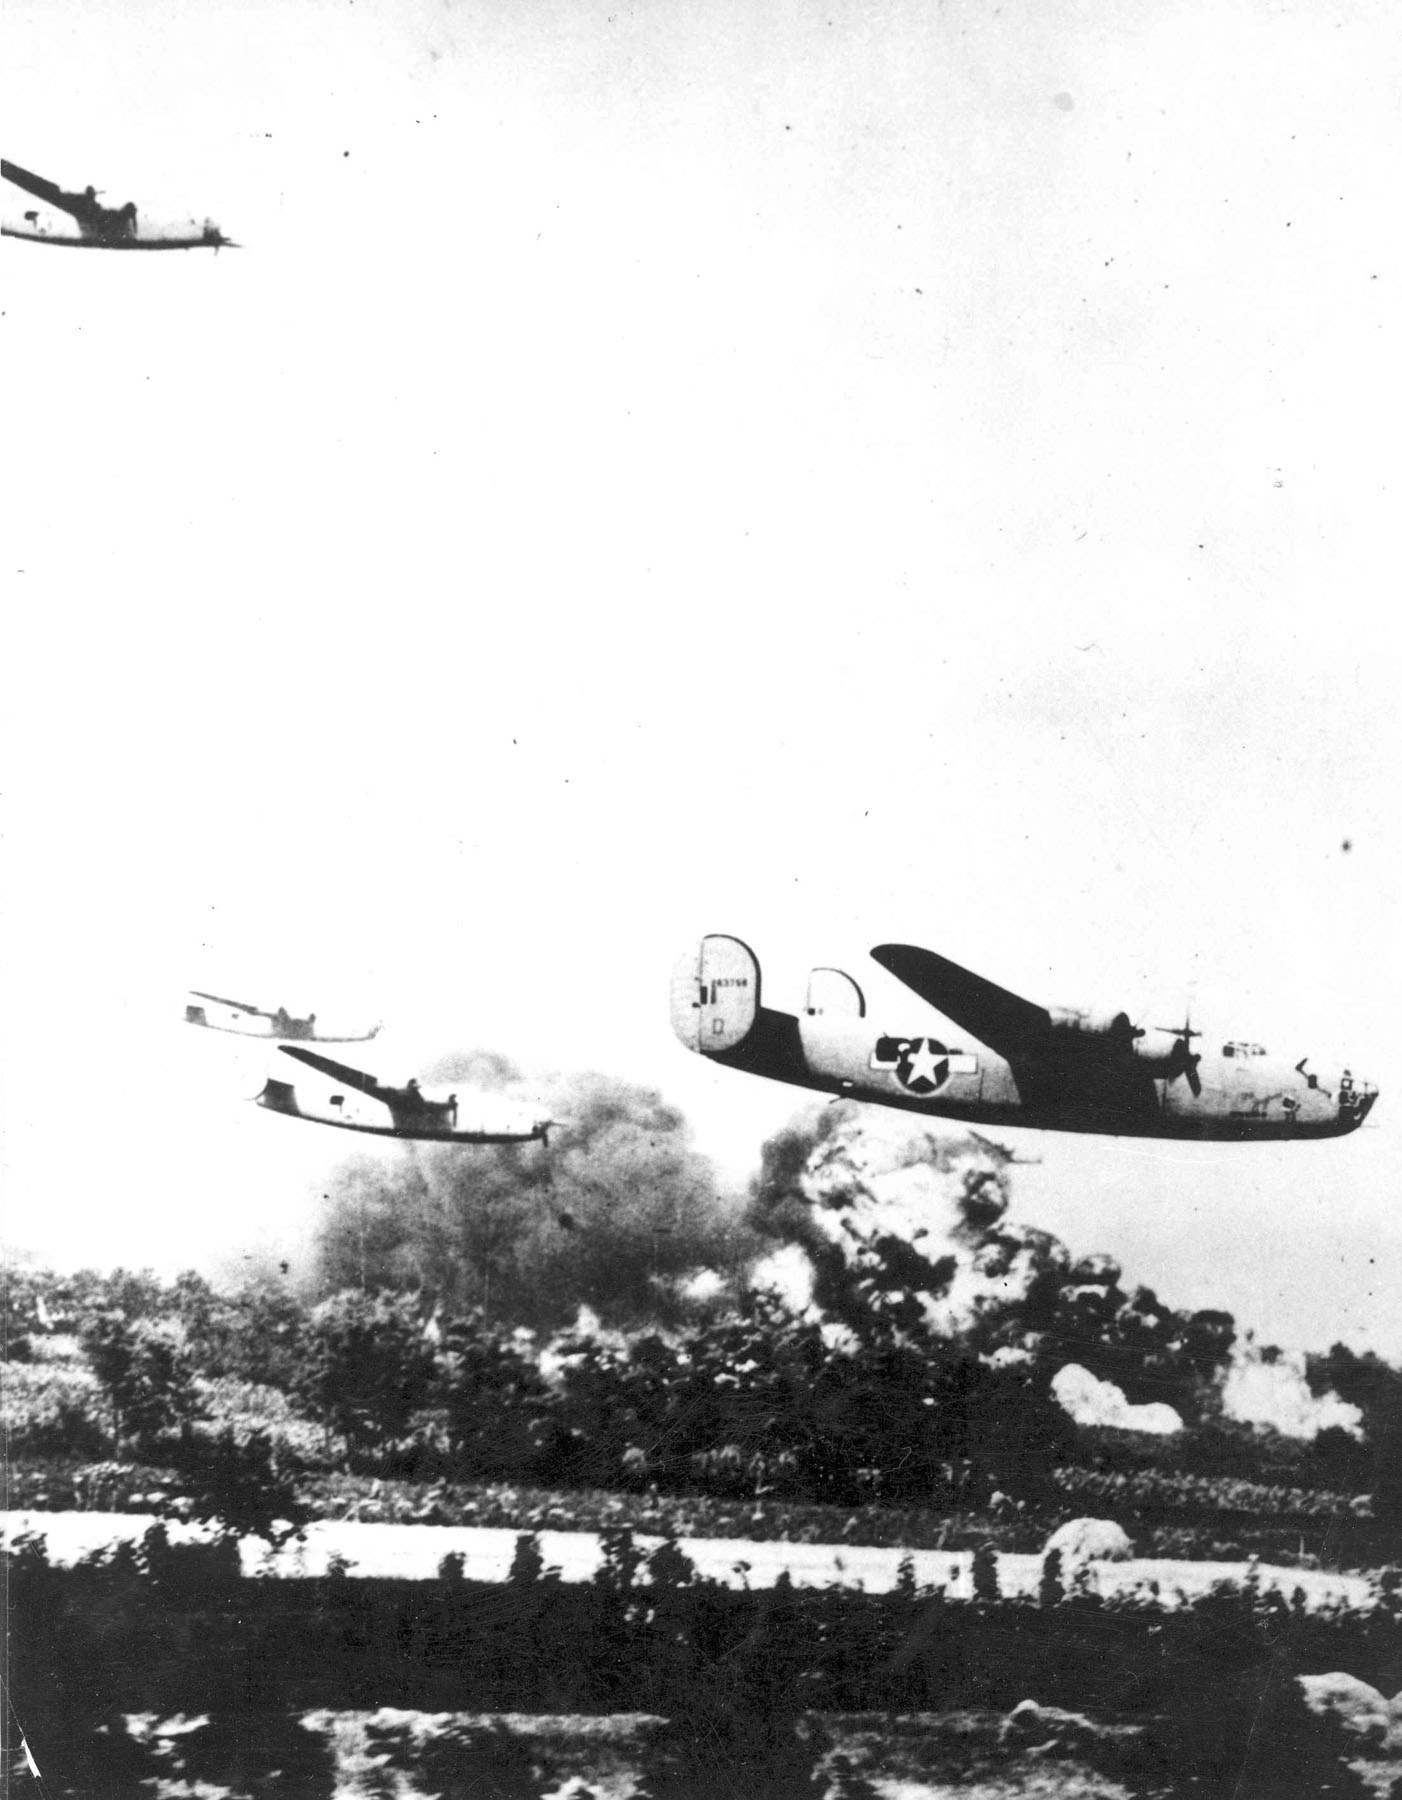 B-24 Liberator bombers over Ploesti oil fields during Operation Tidal Wave, Romania, 1 Aug 1943.